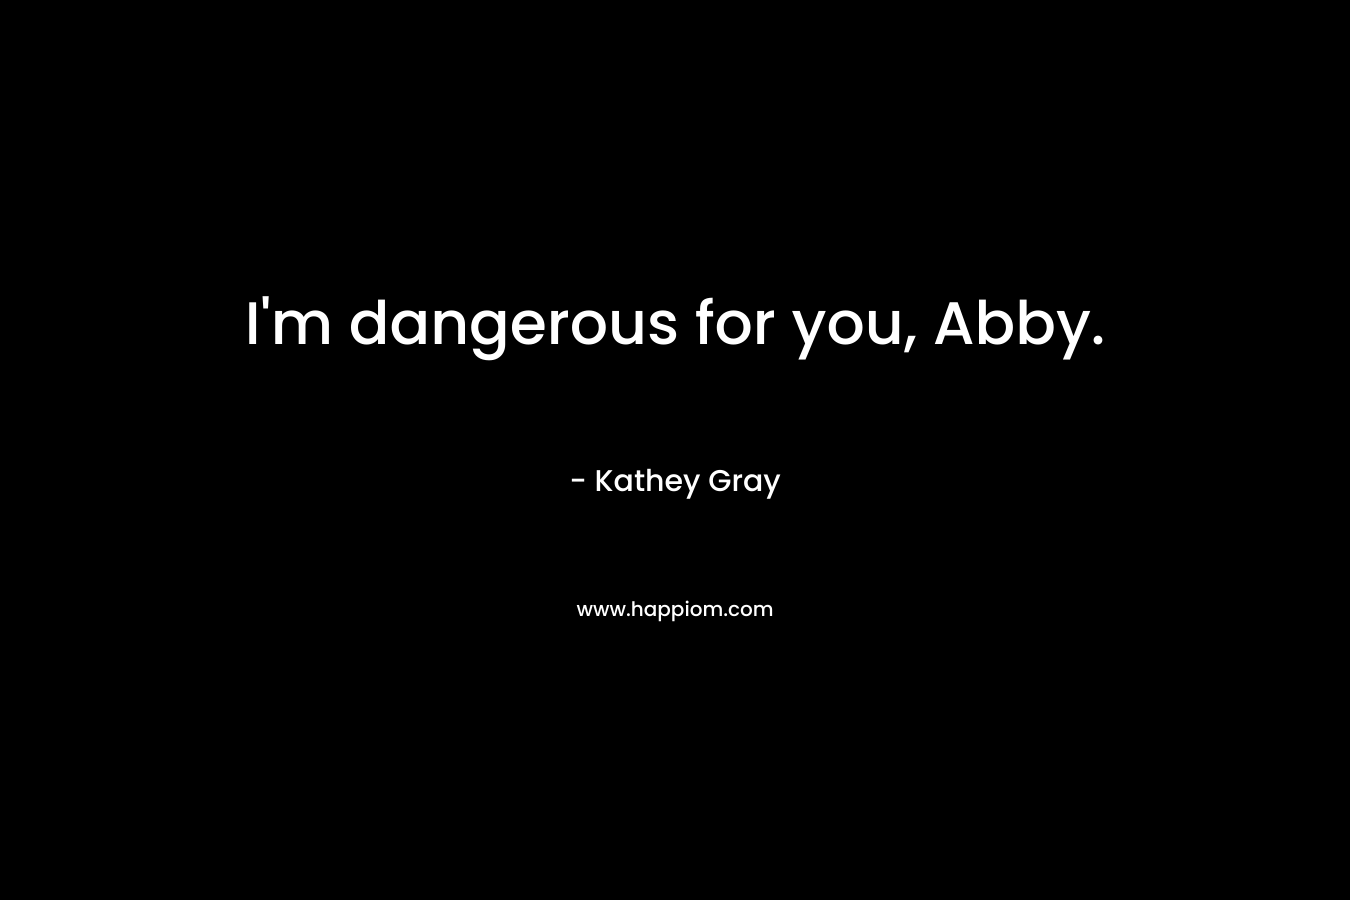 I’m dangerous for you, Abby. – Kathey Gray